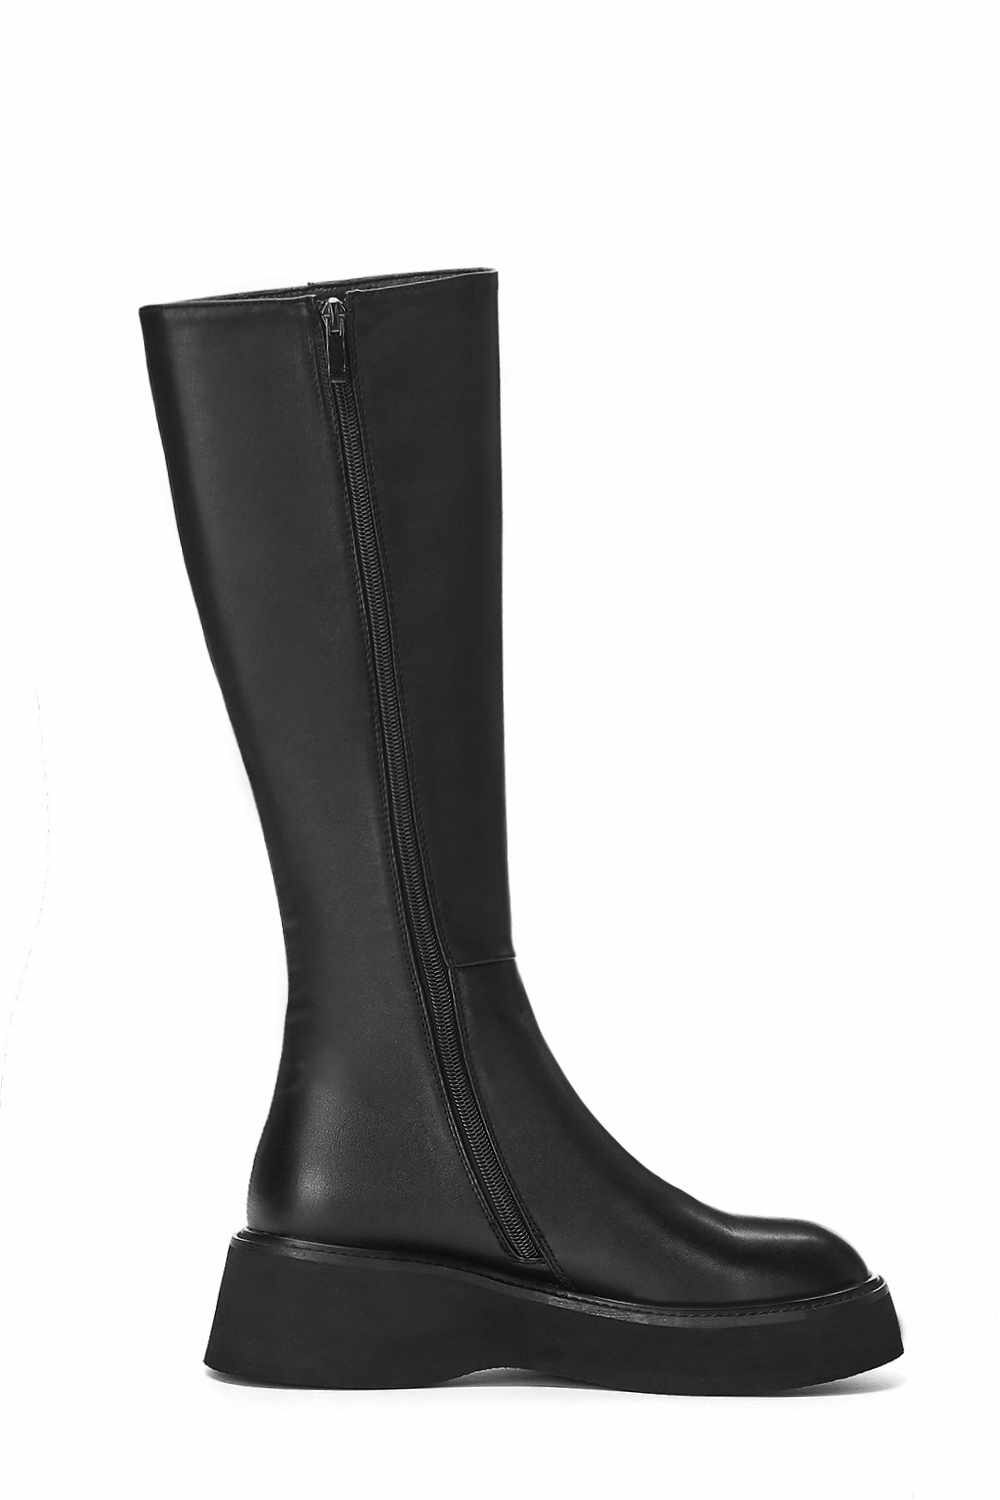 simple style solid brand basic cow leather boots round toe side zipper winter keep warm women thigh high boots - LiveTrendsX